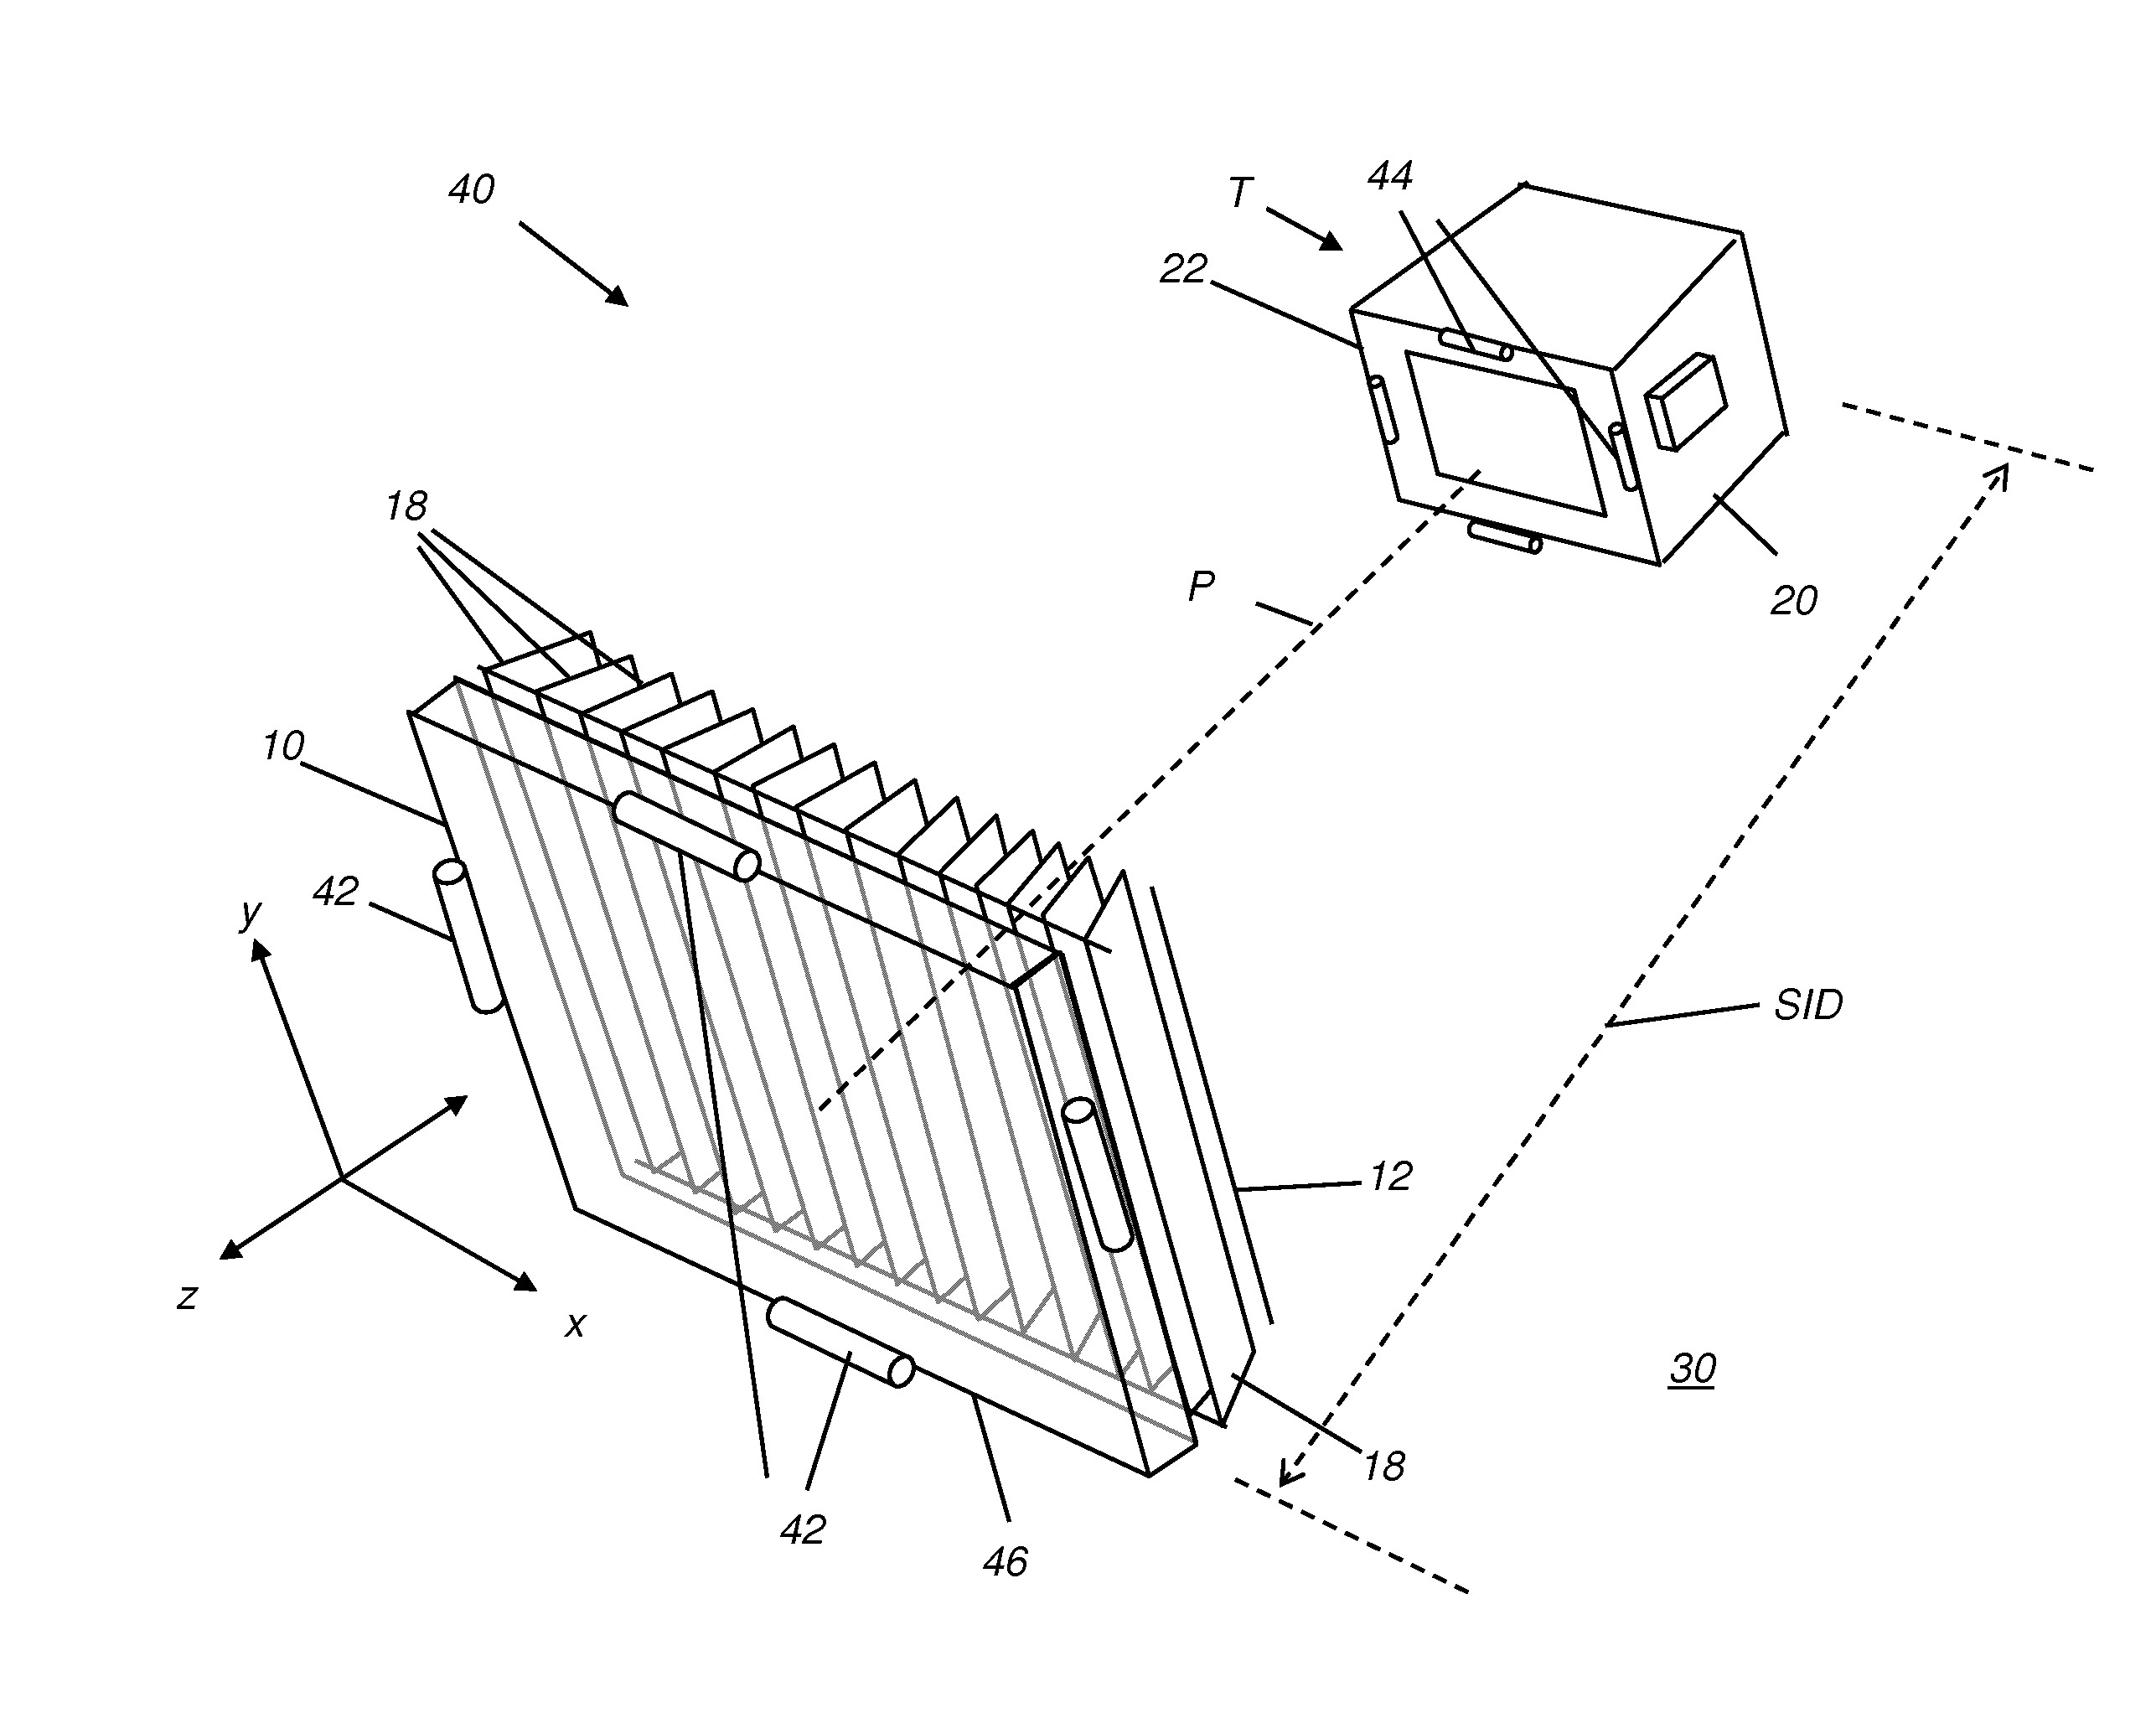 Alignment apparatus for x-ray imaging system